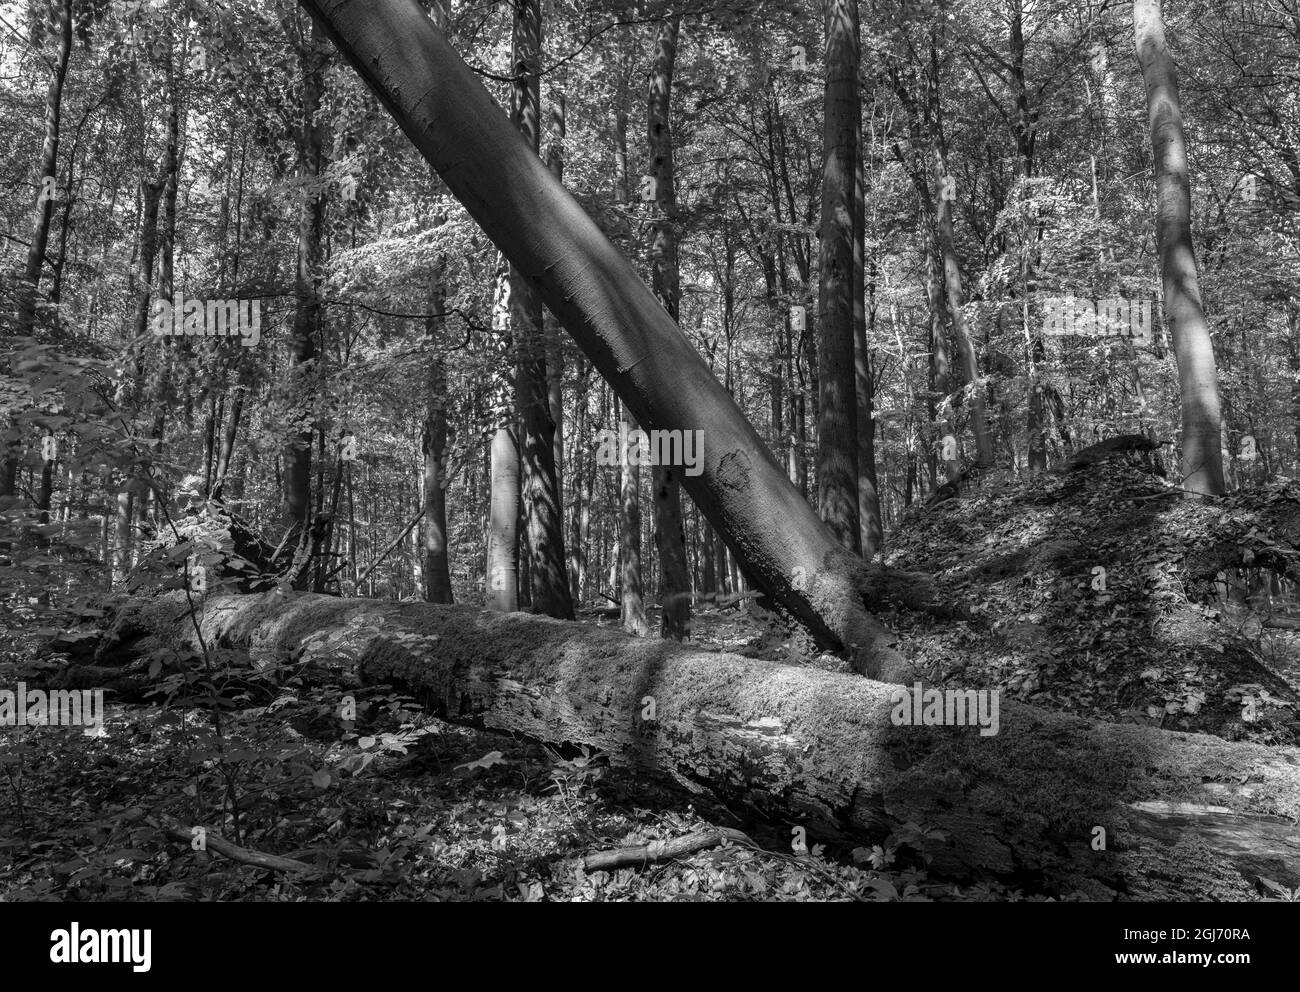 Deadwood, coarse woody debris and fallen trees in the Hainich woodland in Thuringia, National Park and part of the UNESCO World Heritage Site. Primeva Stock Photo